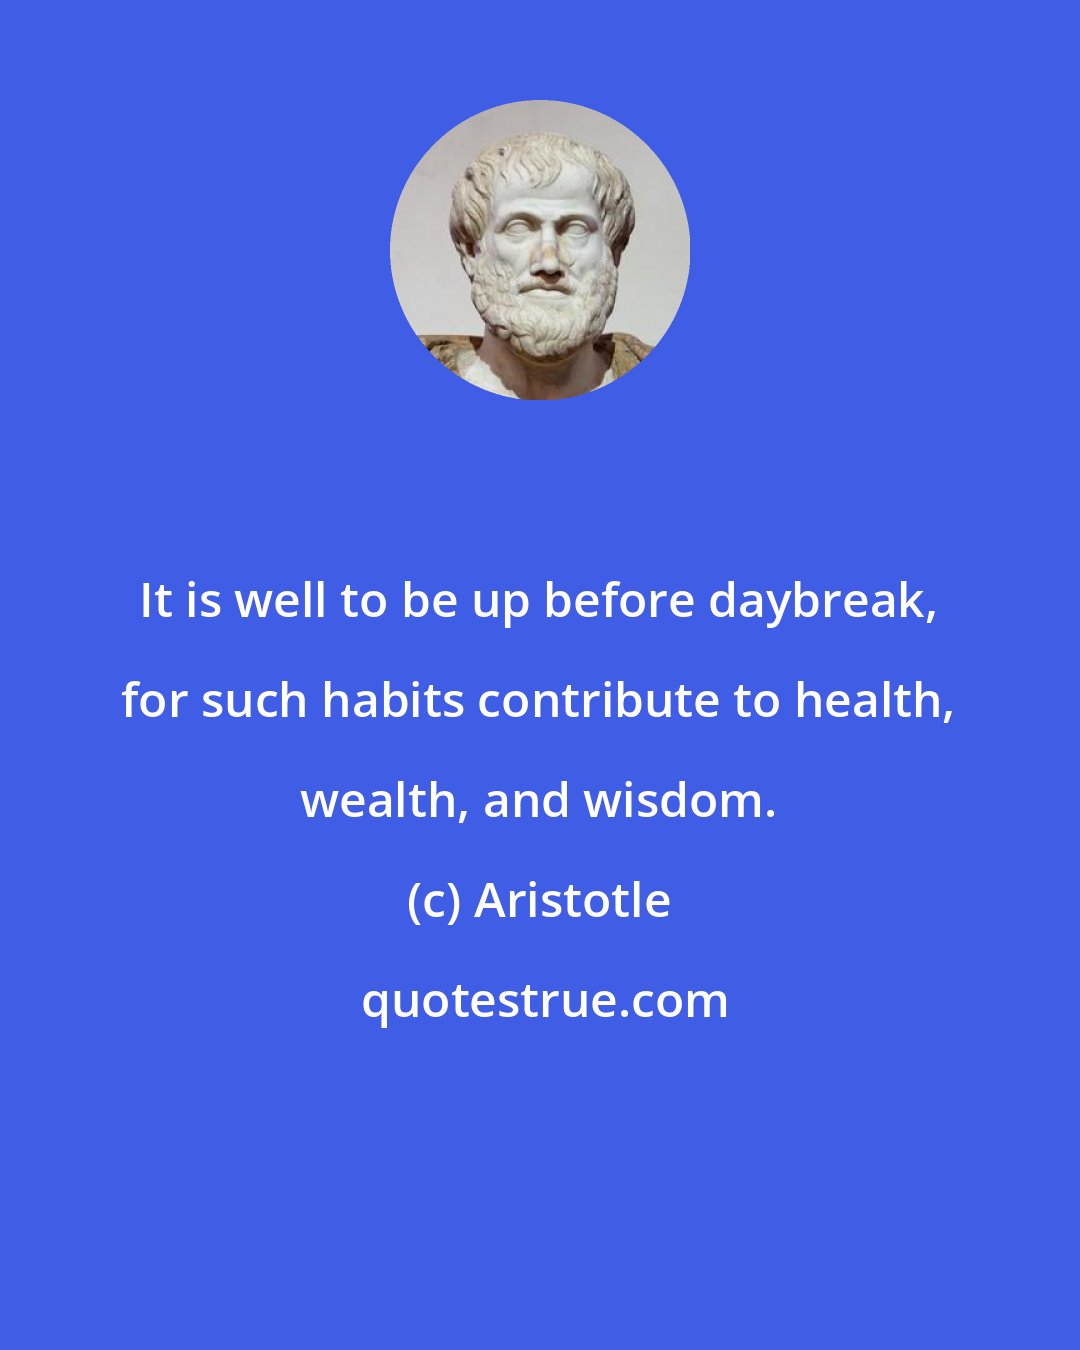 Aristotle: It is well to be up before daybreak, for such habits contribute to health, wealth, and wisdom.